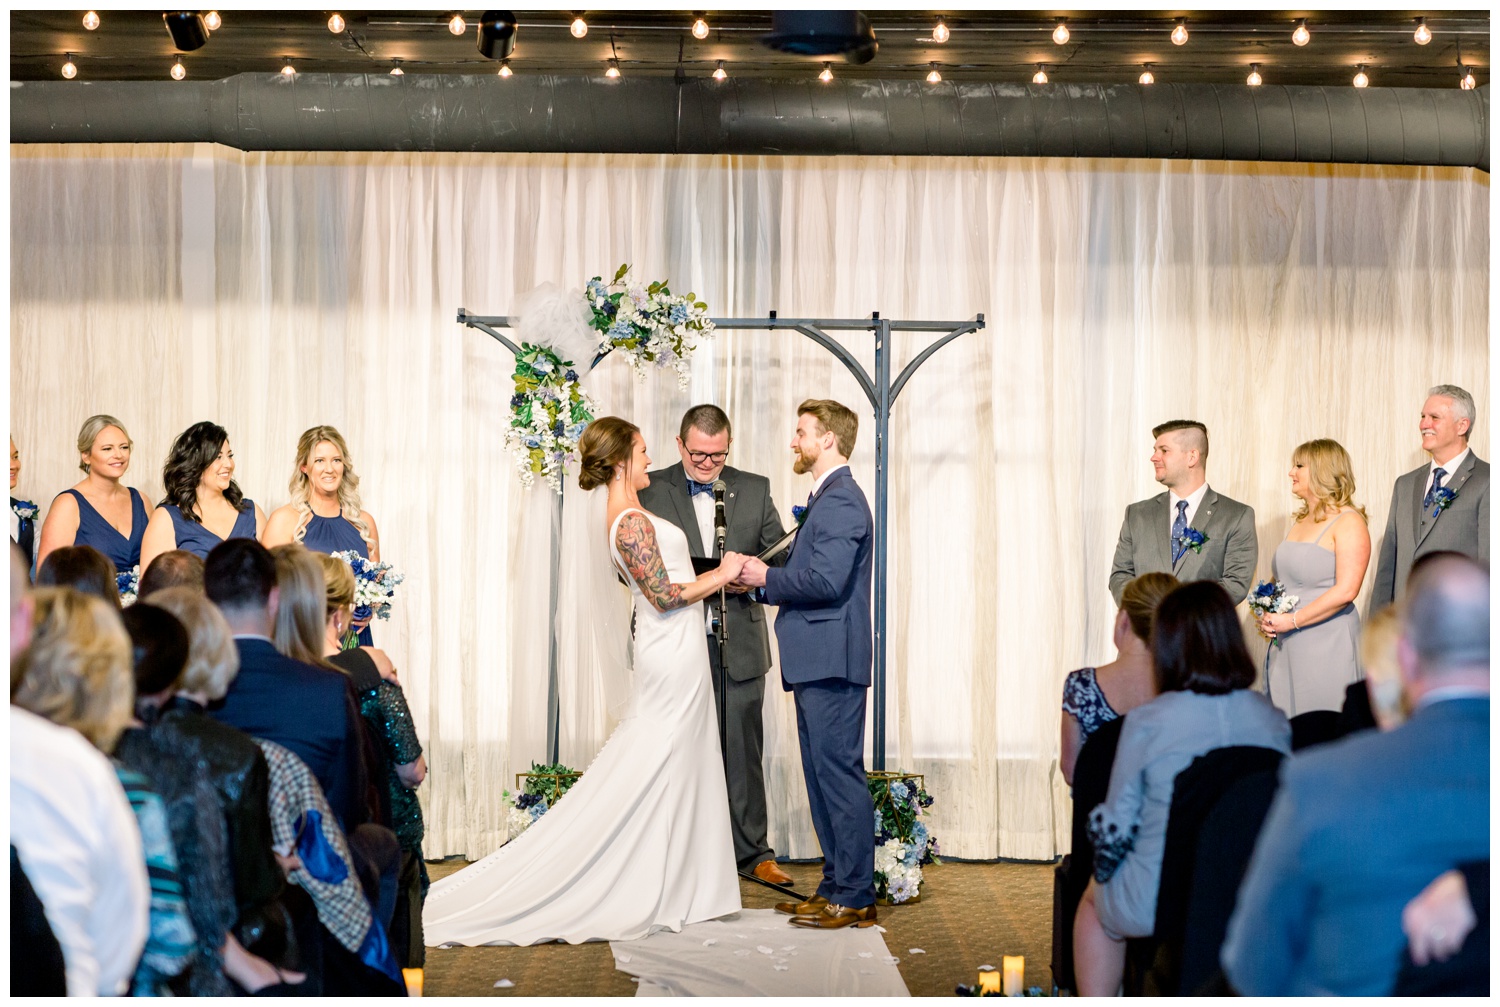 Bride and Groom at The Madison Event Center Wedding Ceremony